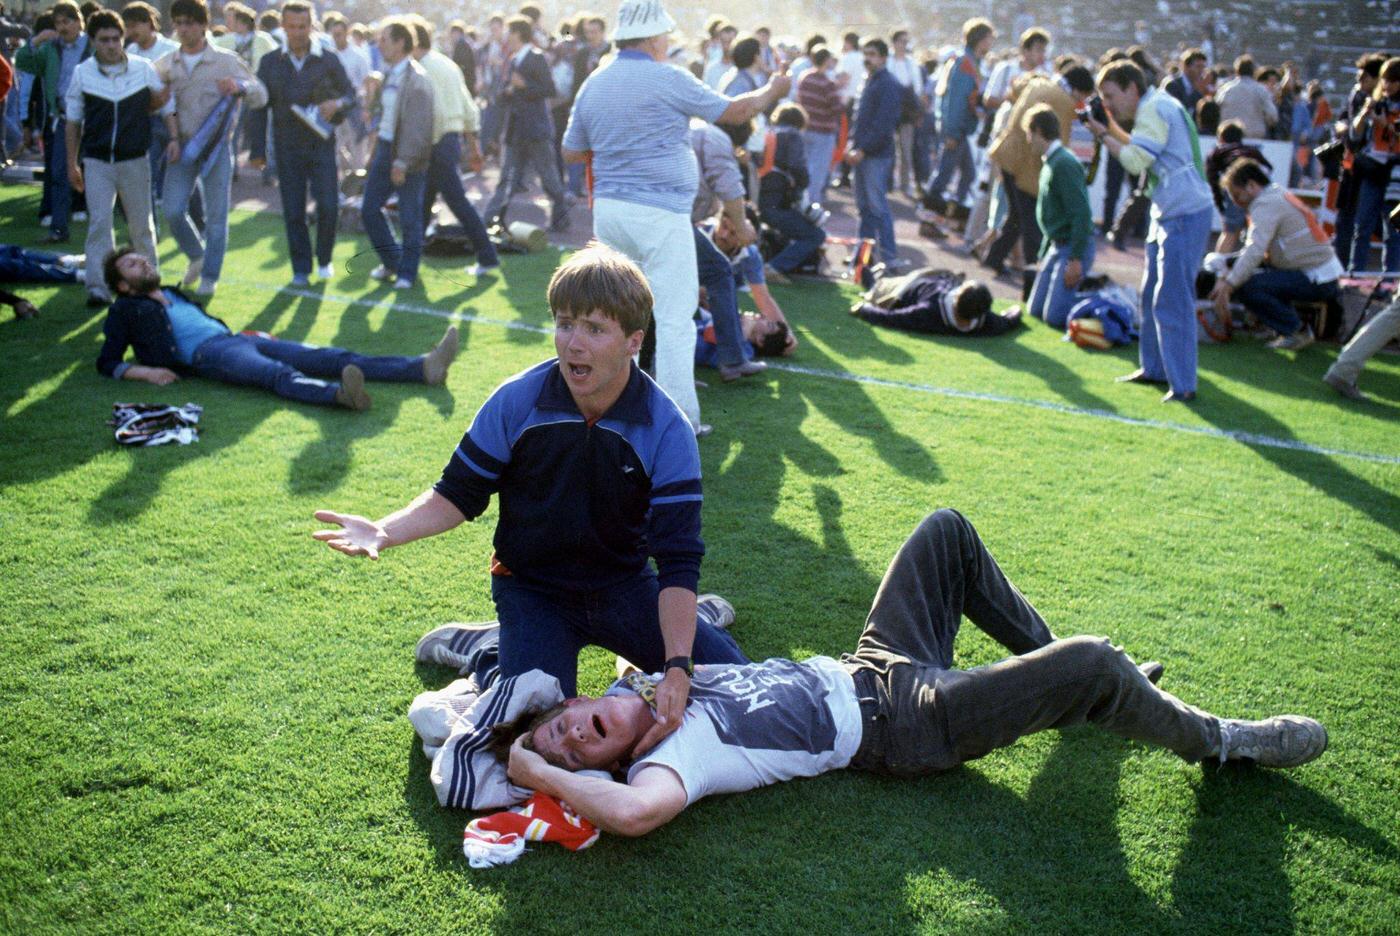 Juventus Fan Cries for Help for Injured Friend, European Cup Final, 1985.